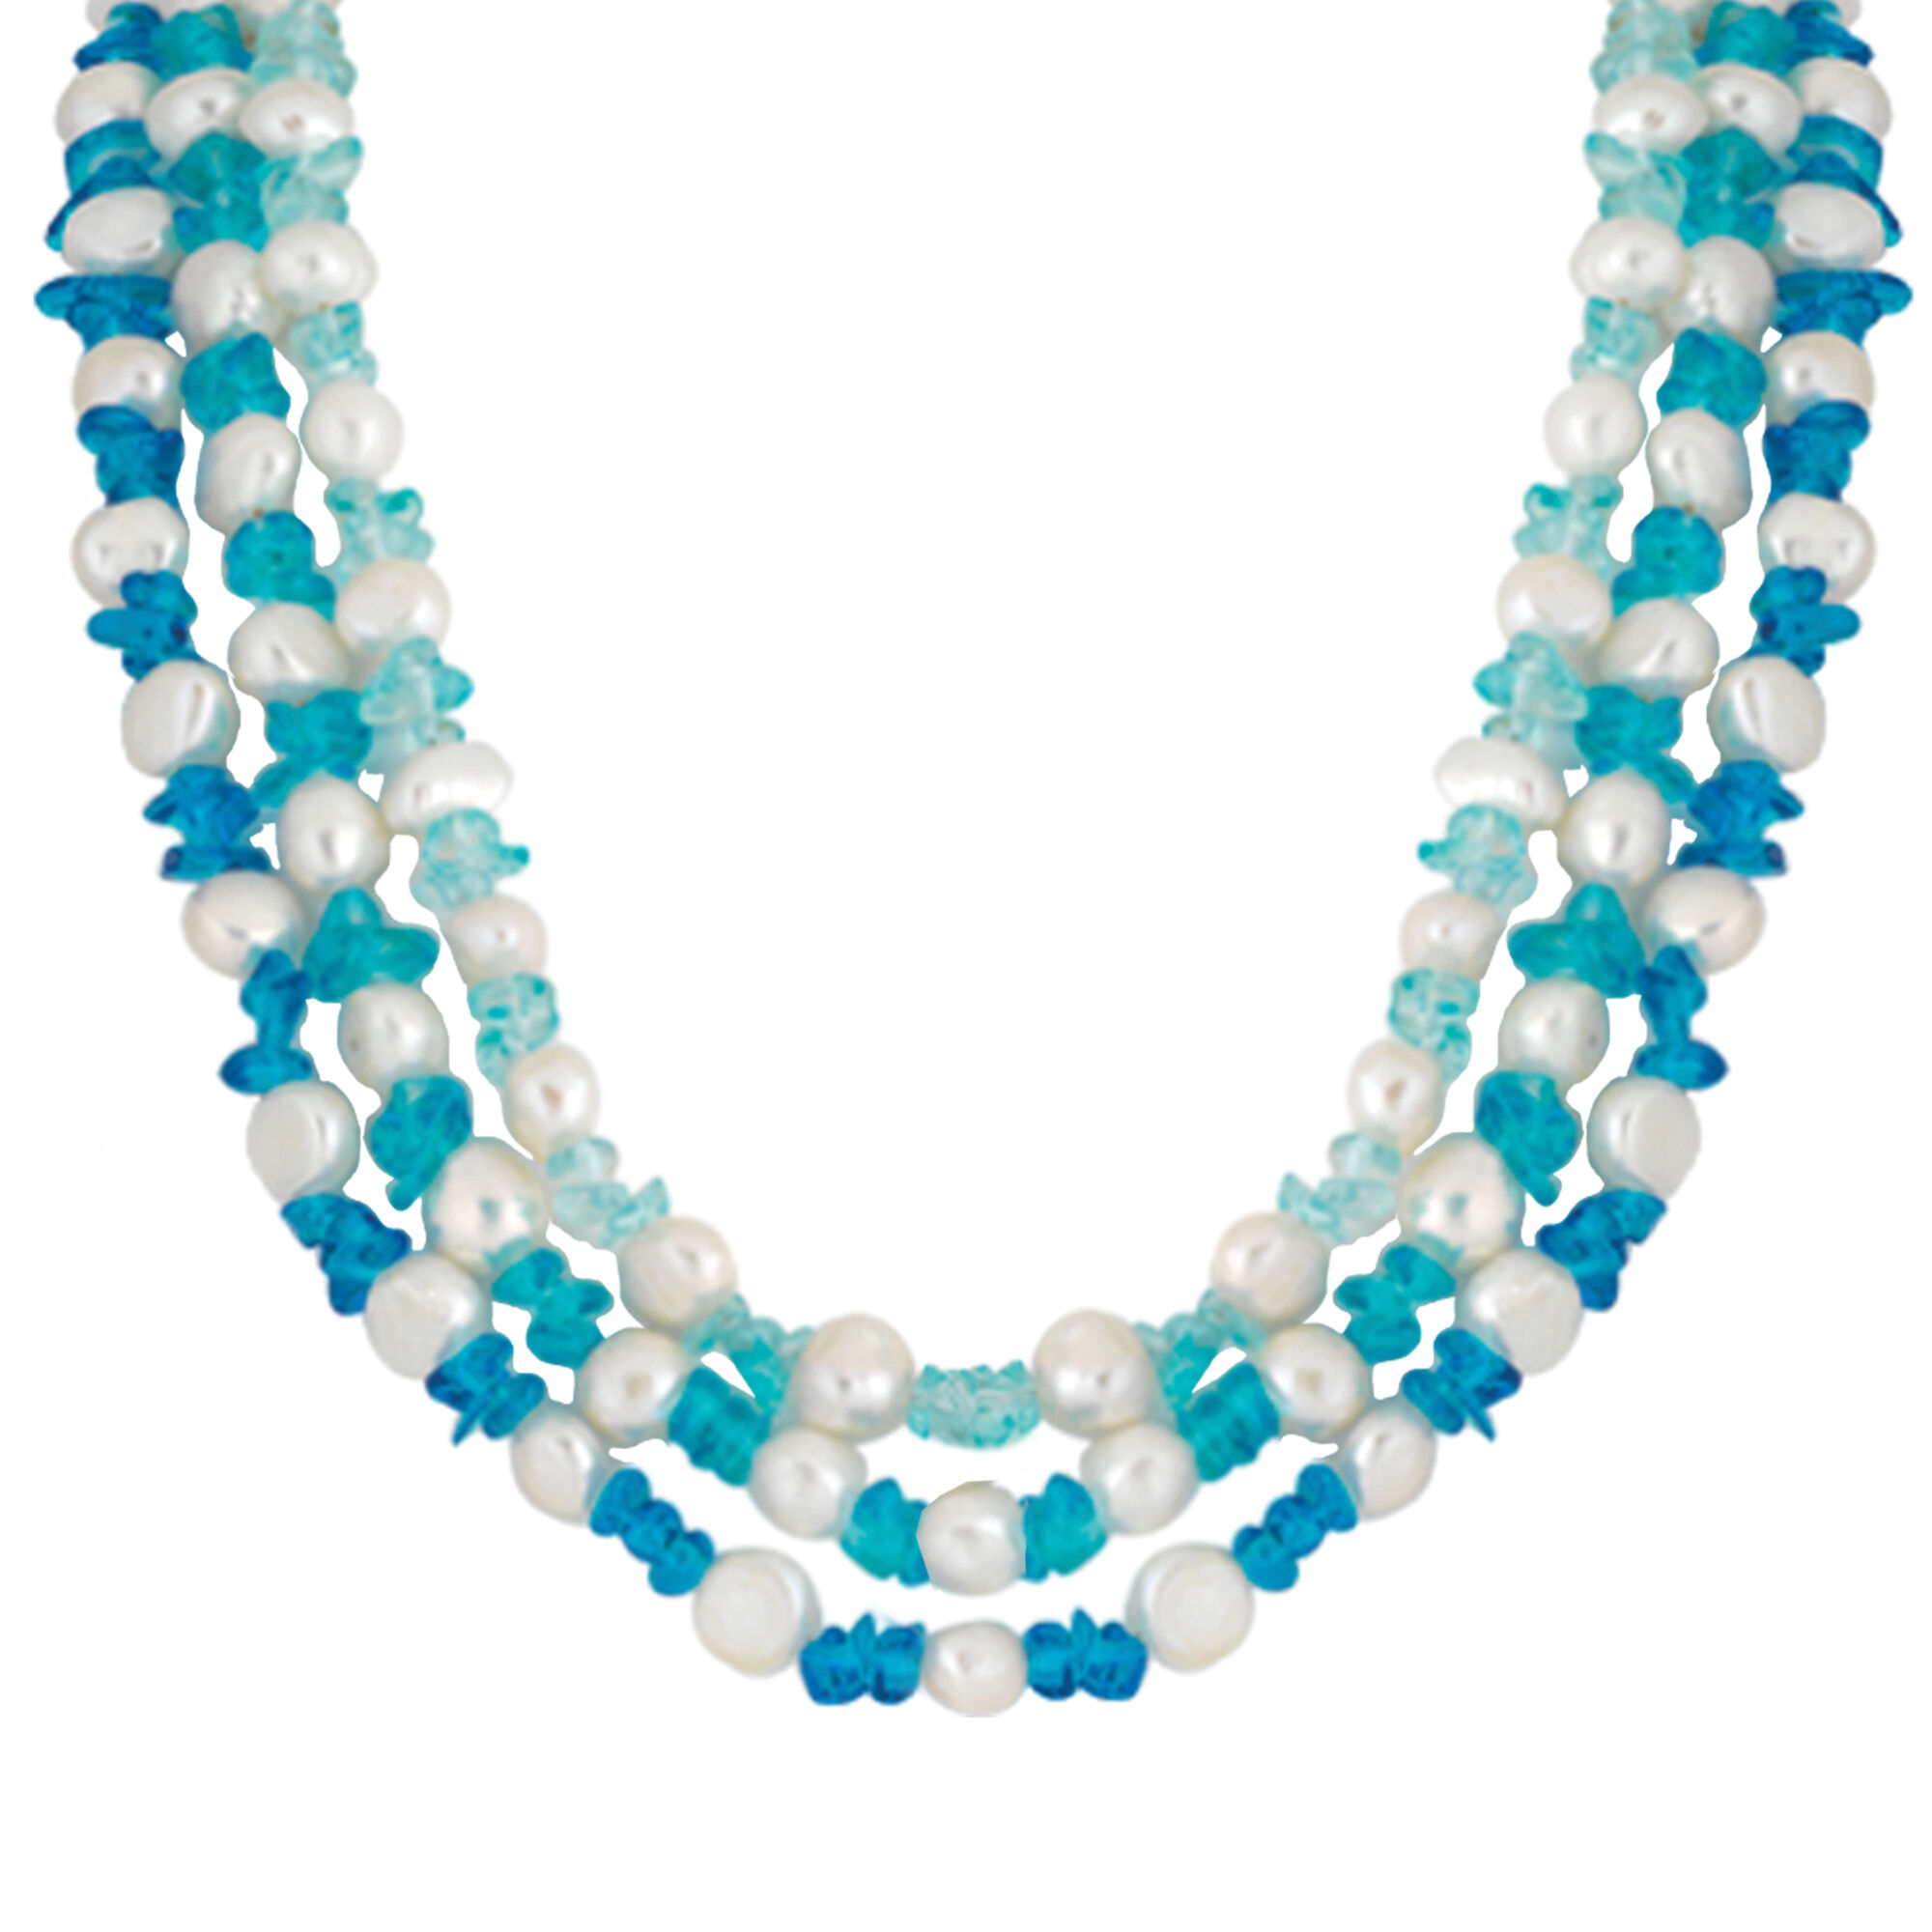 Blue Wave Pearl Necklace 6748 0012 a main